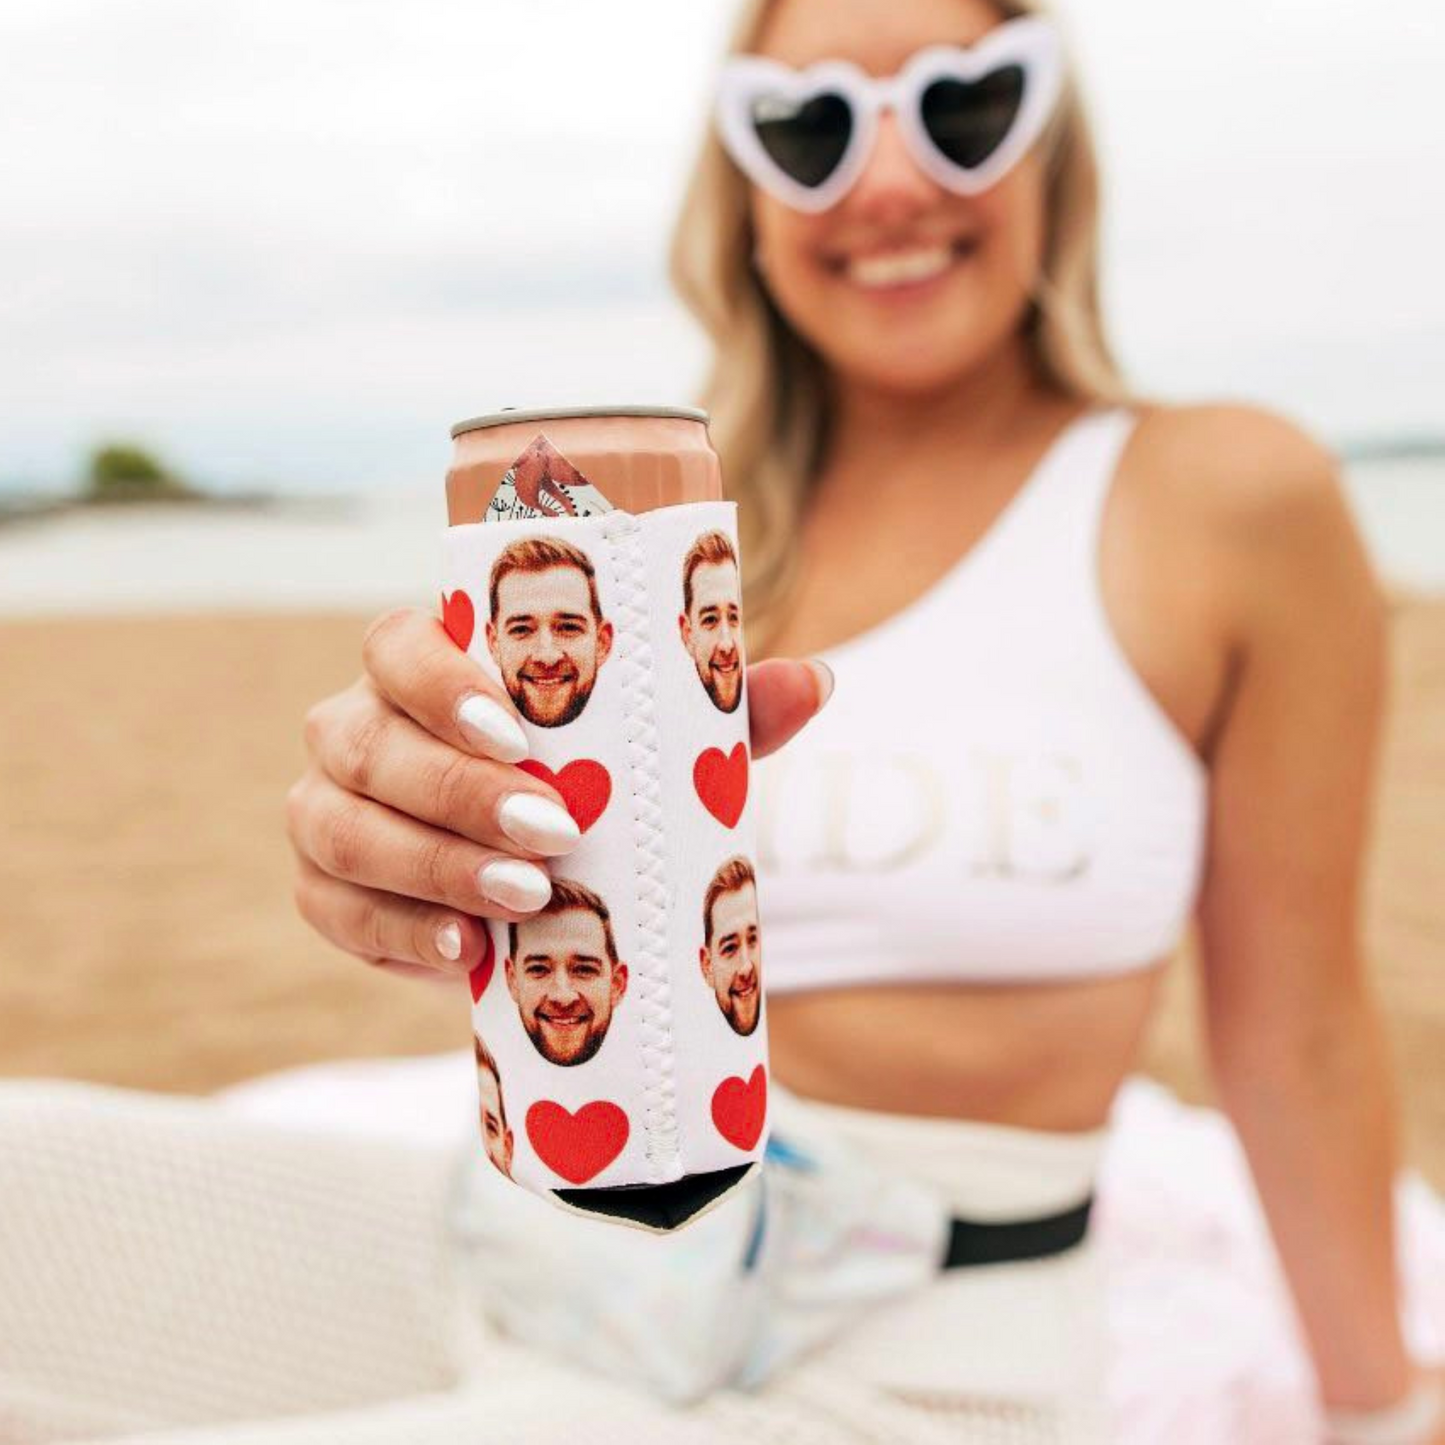 Personalized Groom's Can Cooler - "Heartfelt Groom" with Love and Laughter